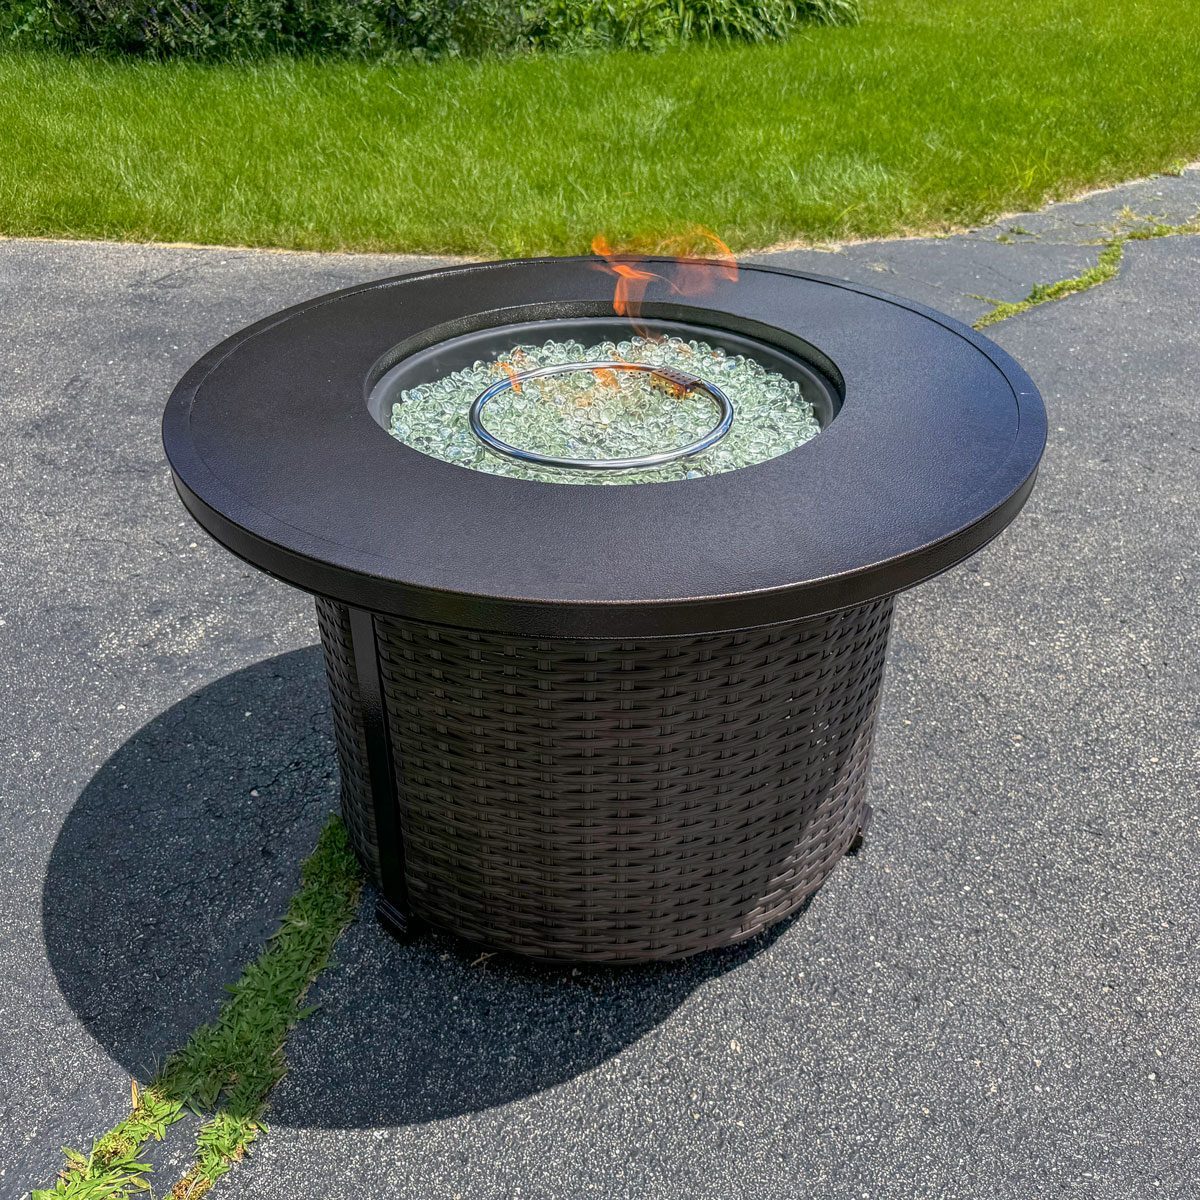 Outdoor Patio Propane Gas Firepit